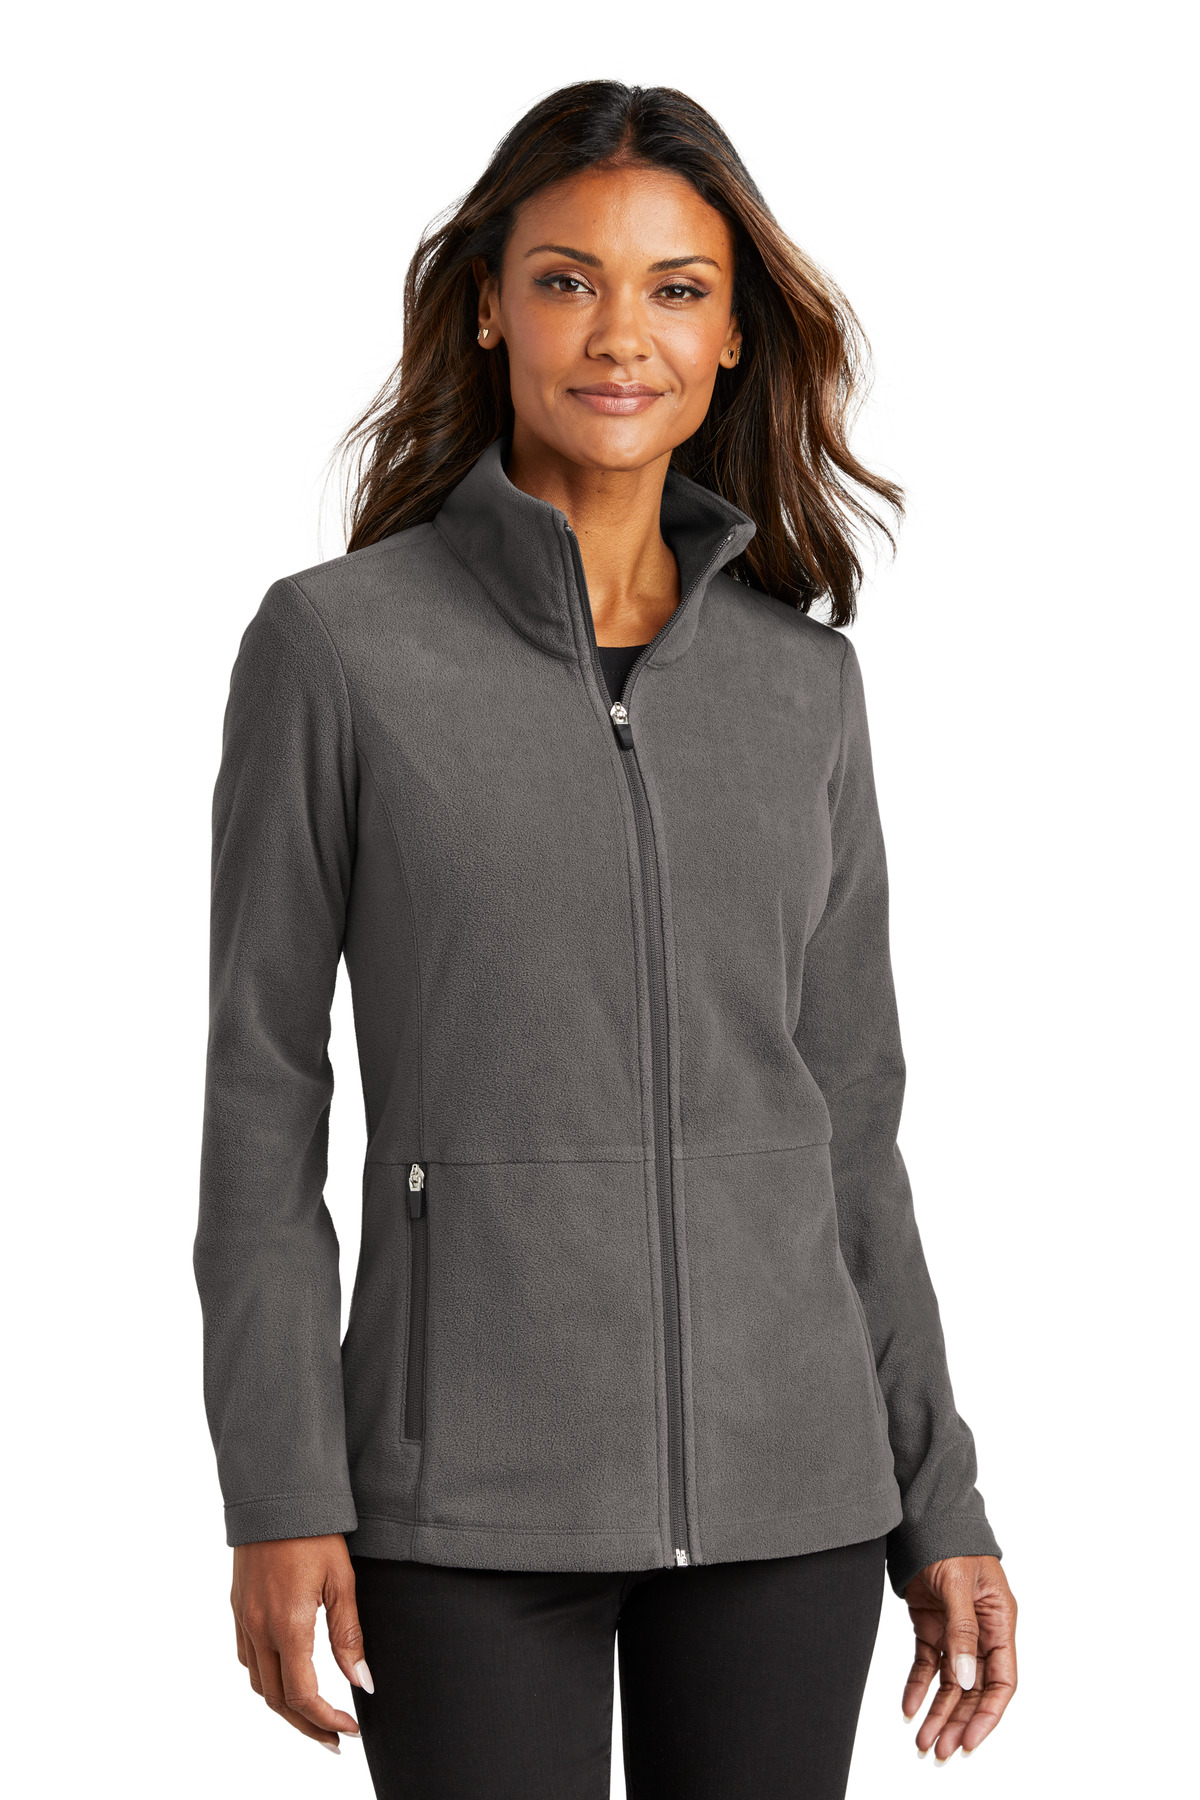 https://images.shirtspace.com/fullsize/qTYXBUPXfvsfvceh%2BHe1MA%3D%3D/423916/20033-port-authority-l151-port-authority-ladies-accord-microfleece-jacket-front-pewter.jpg